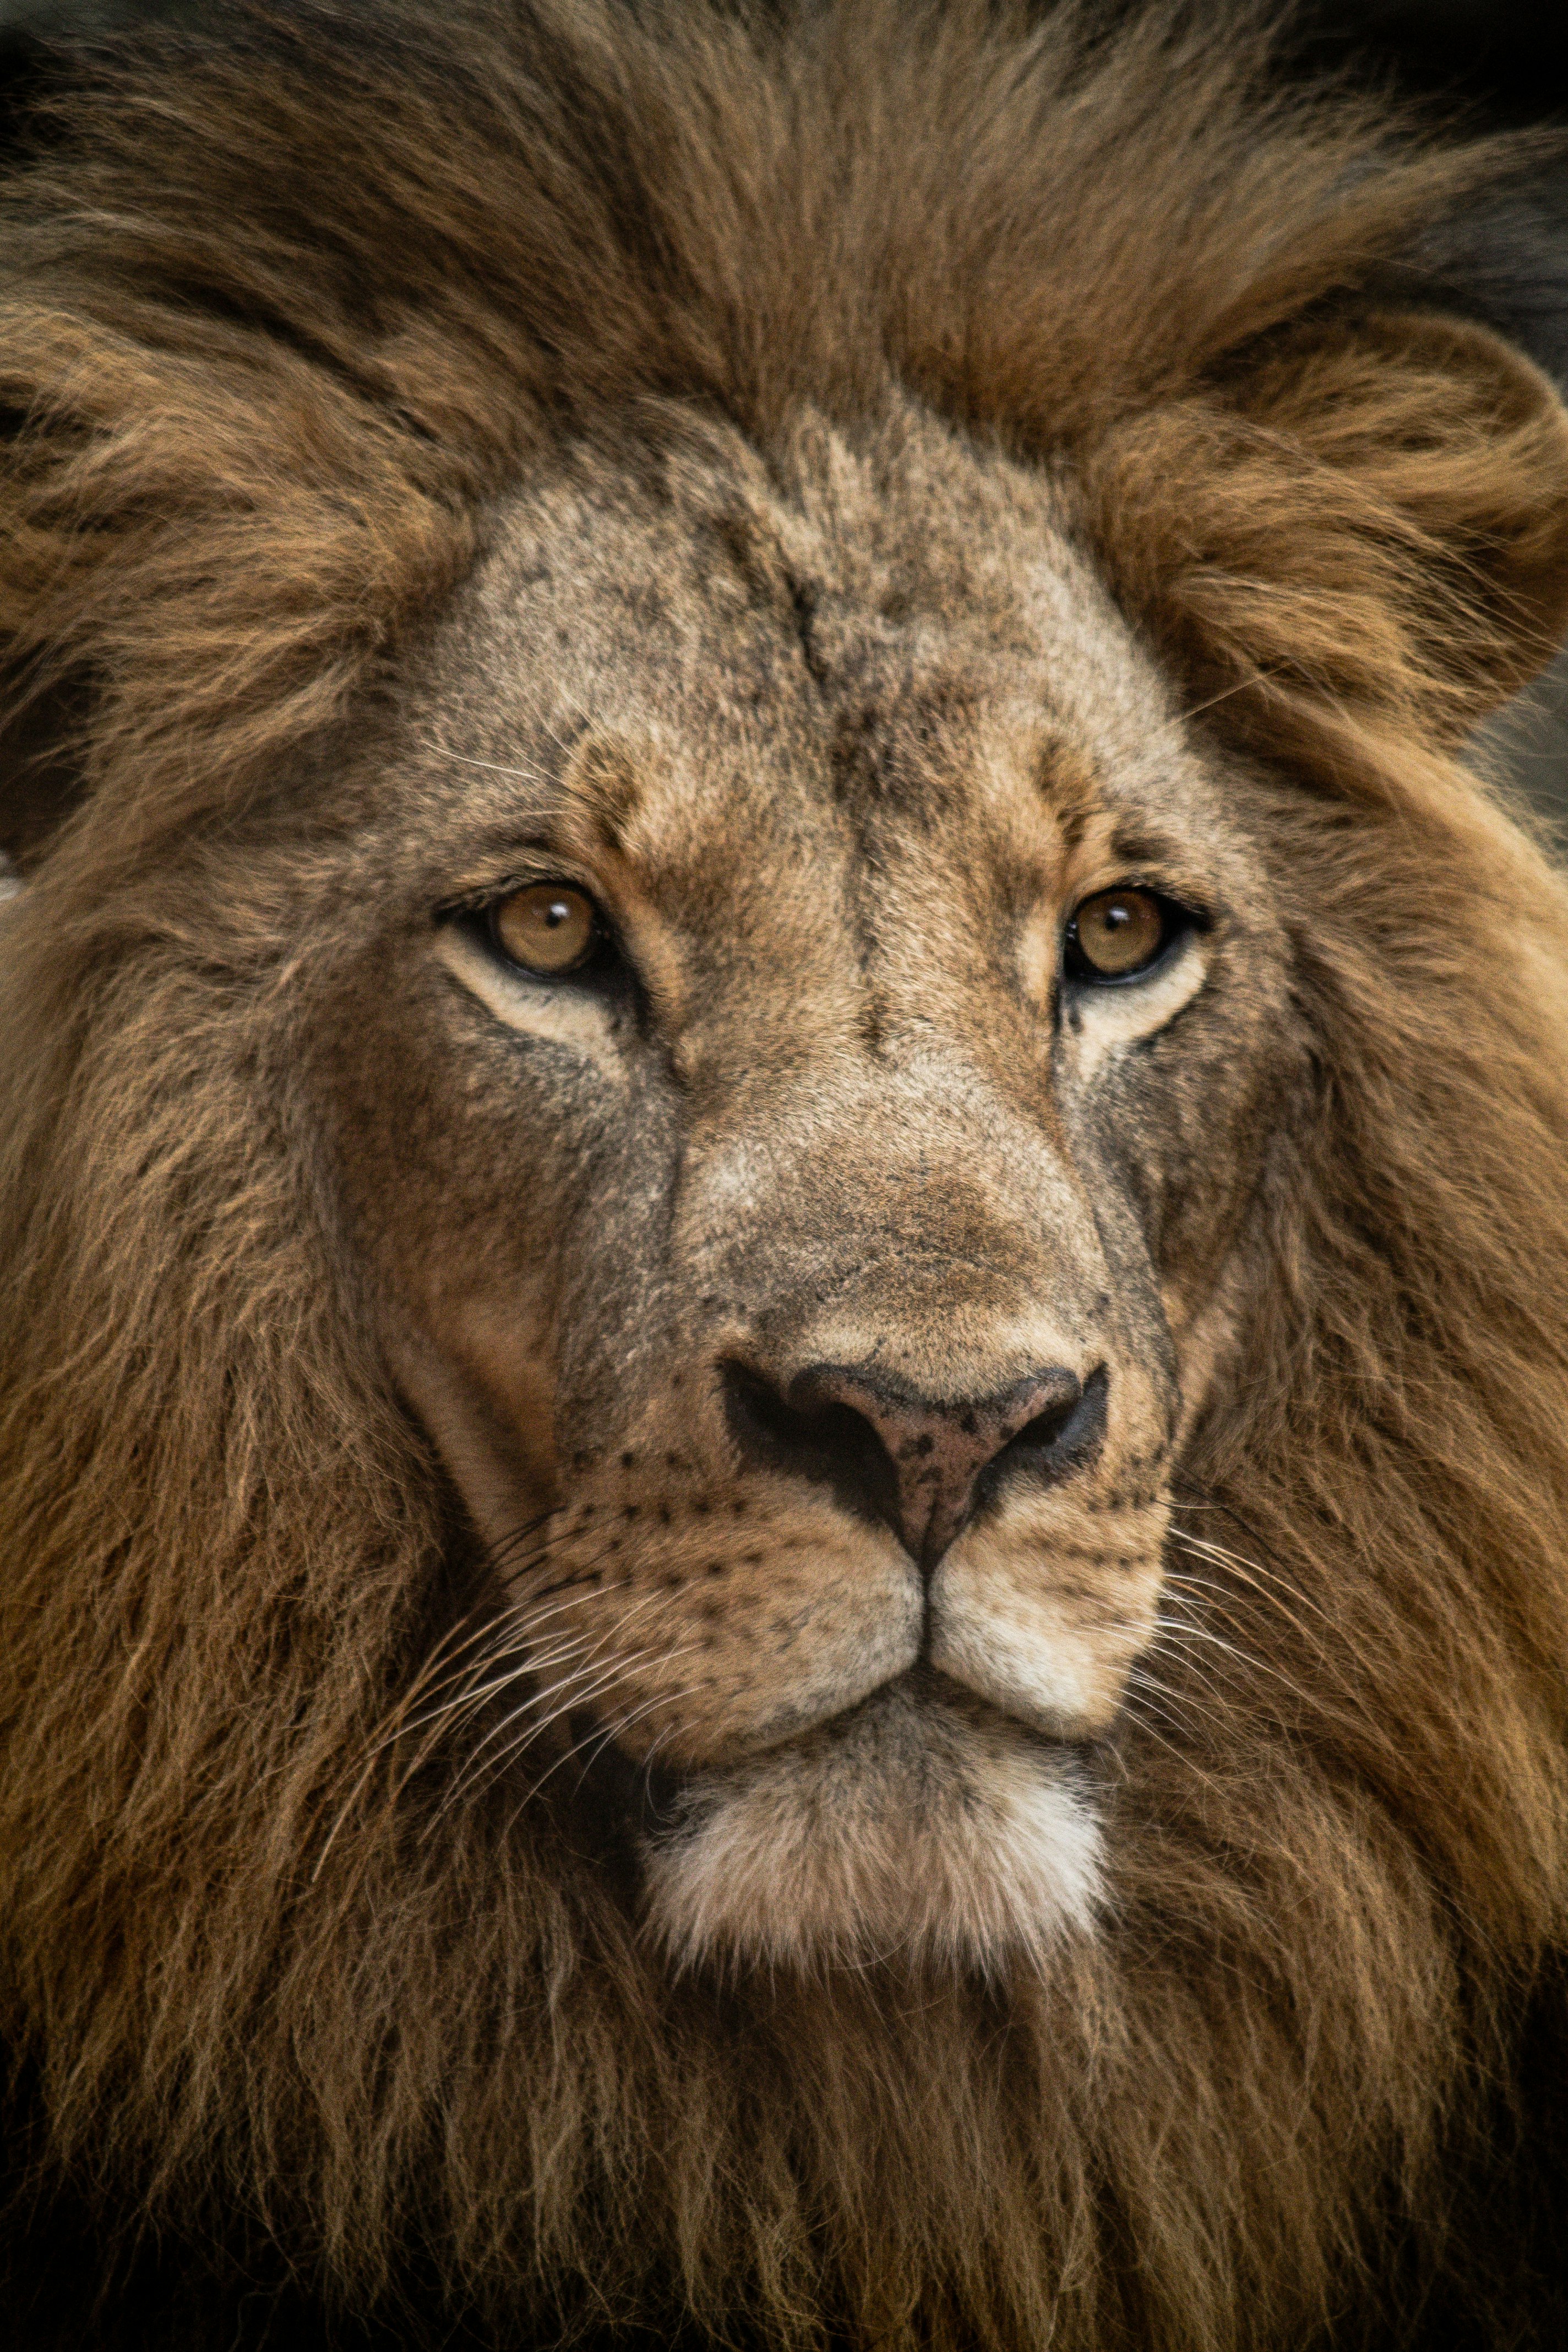 Staring at a lion through the camera with a zoom lens is quite a powerful experience. I got to photograph this stunning lion at the Nairobi Animal Orphanage outside of Nariobi National Park